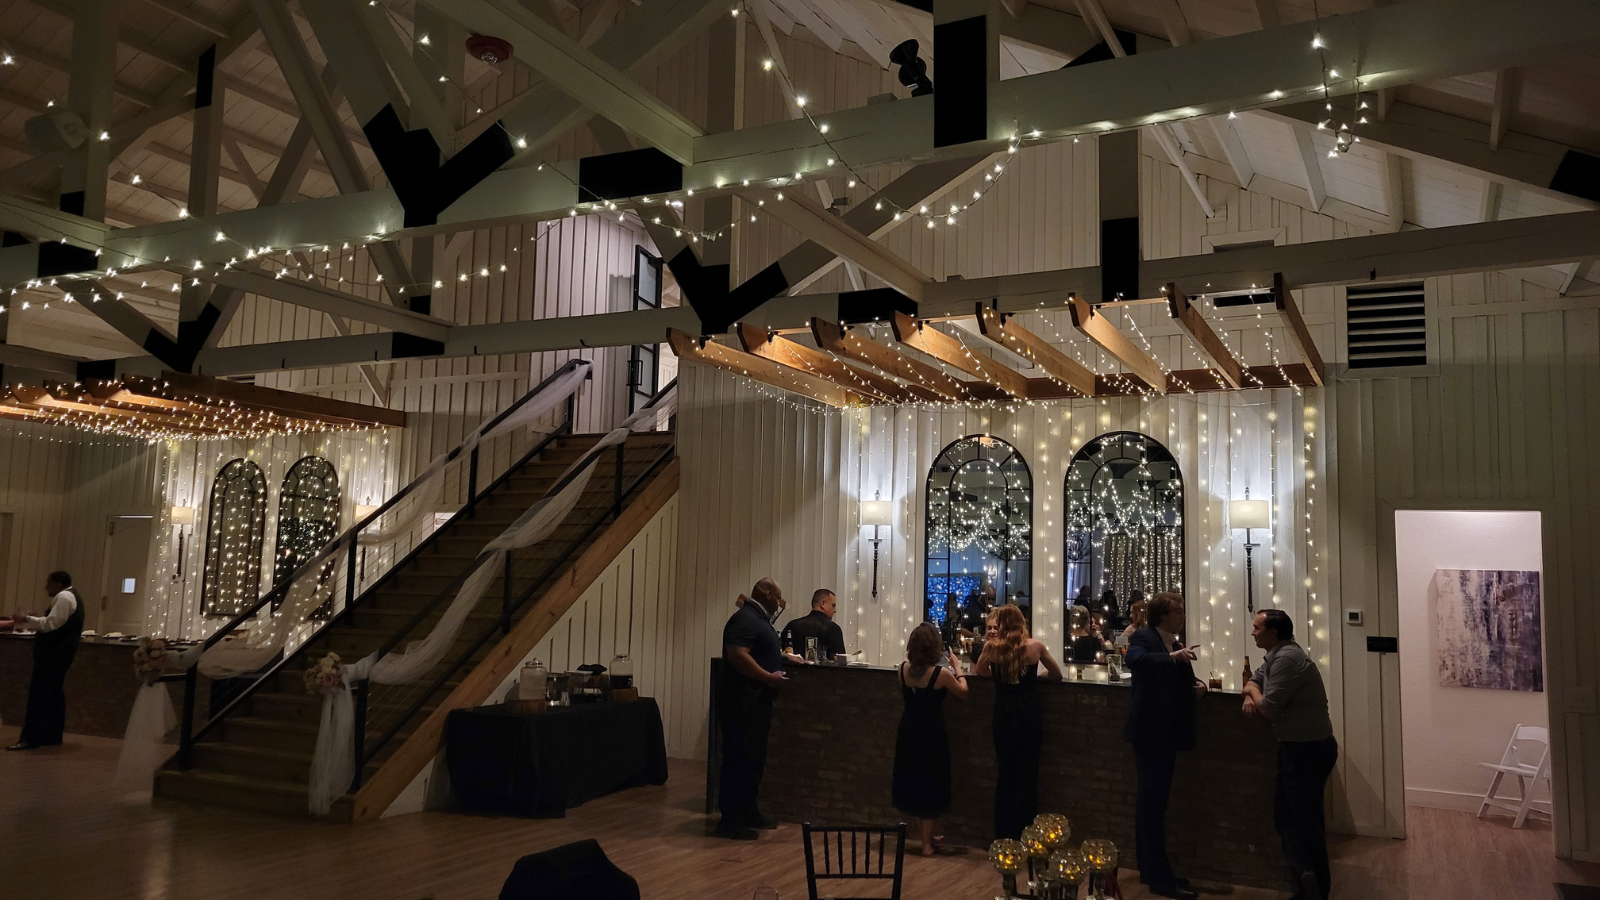 twinkle-lights-draped-over-bar-at-georgetown-wedding